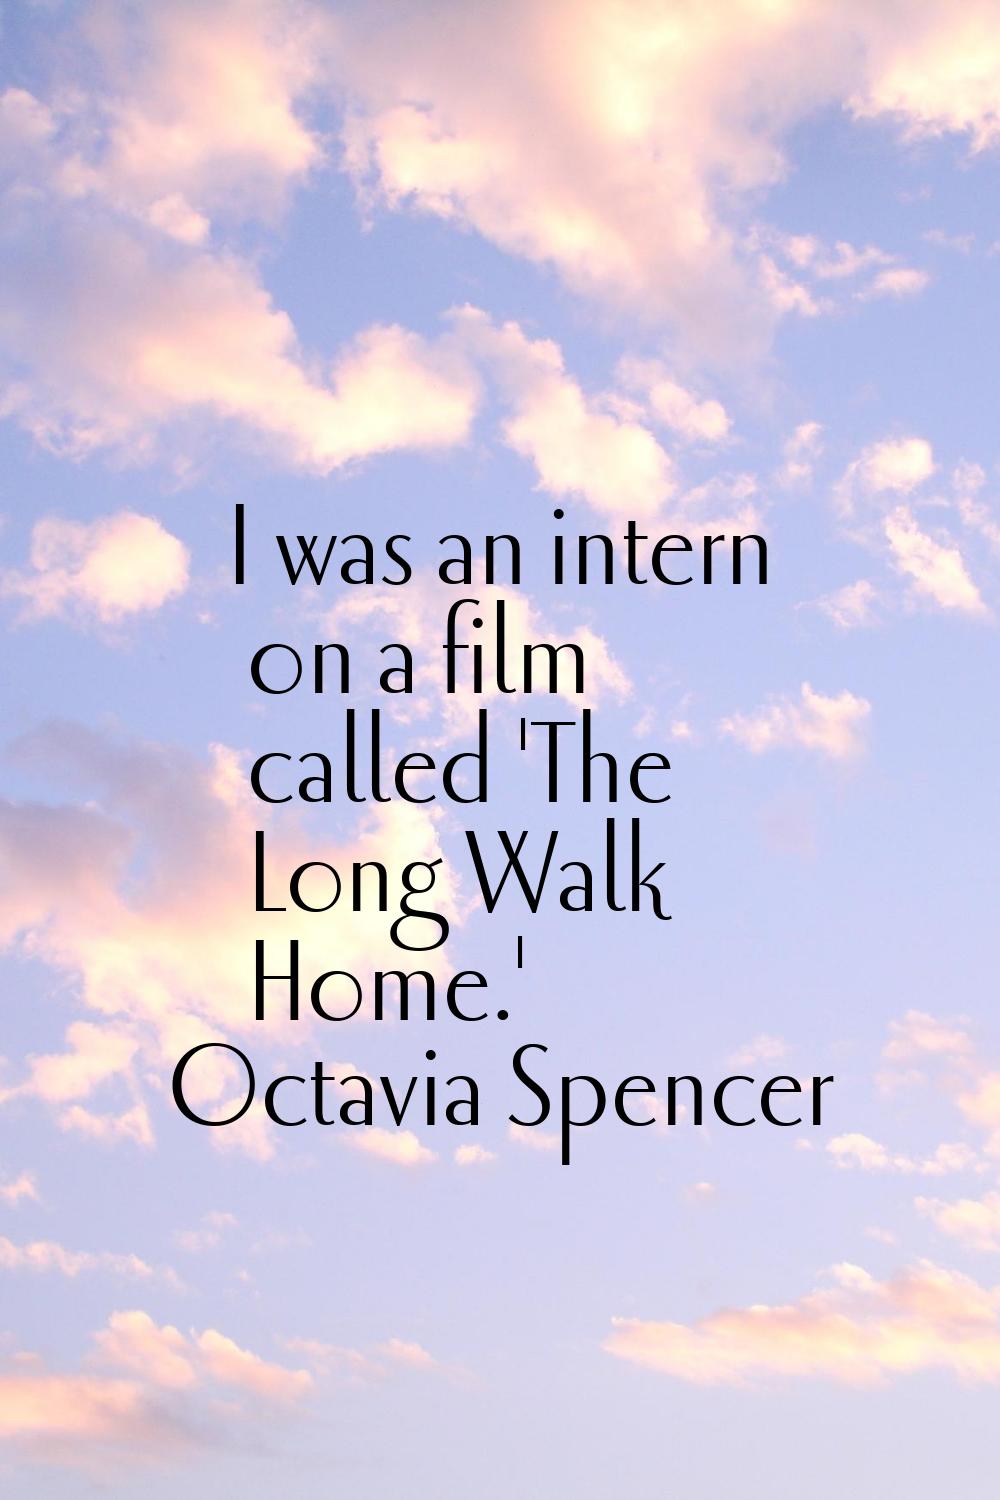 I was an intern on a film called 'The Long Walk Home.'